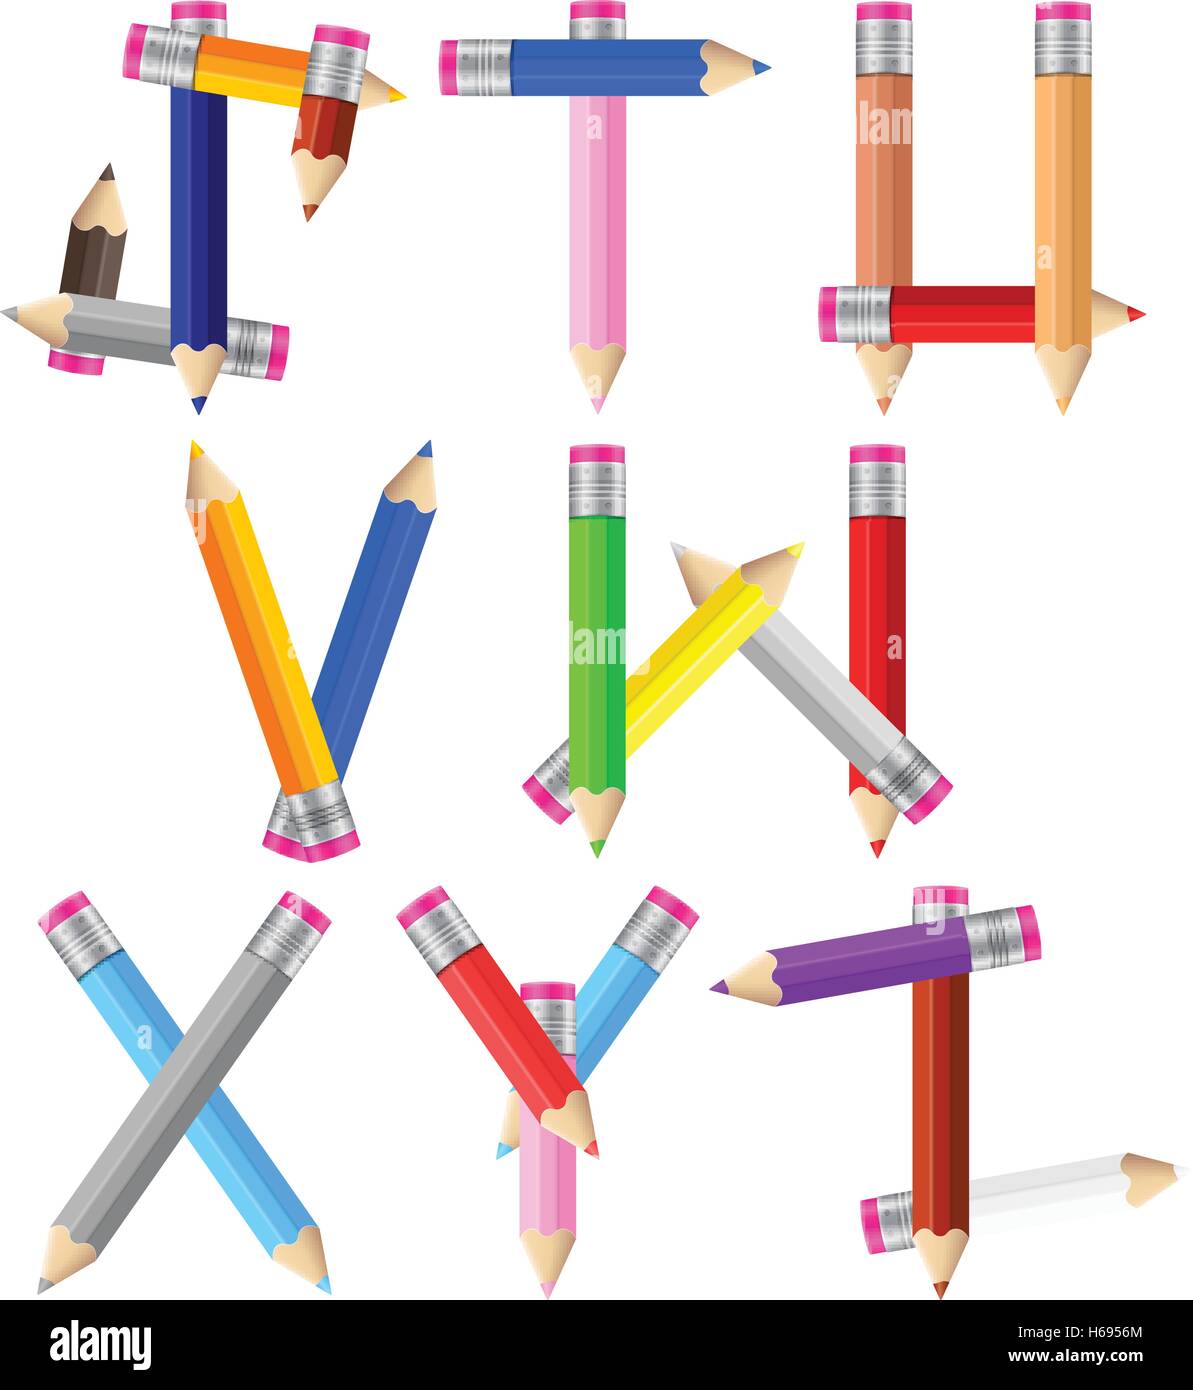 Alphabet formed by pencils from S to Z on a white background. Vector illustration. Stock Vector